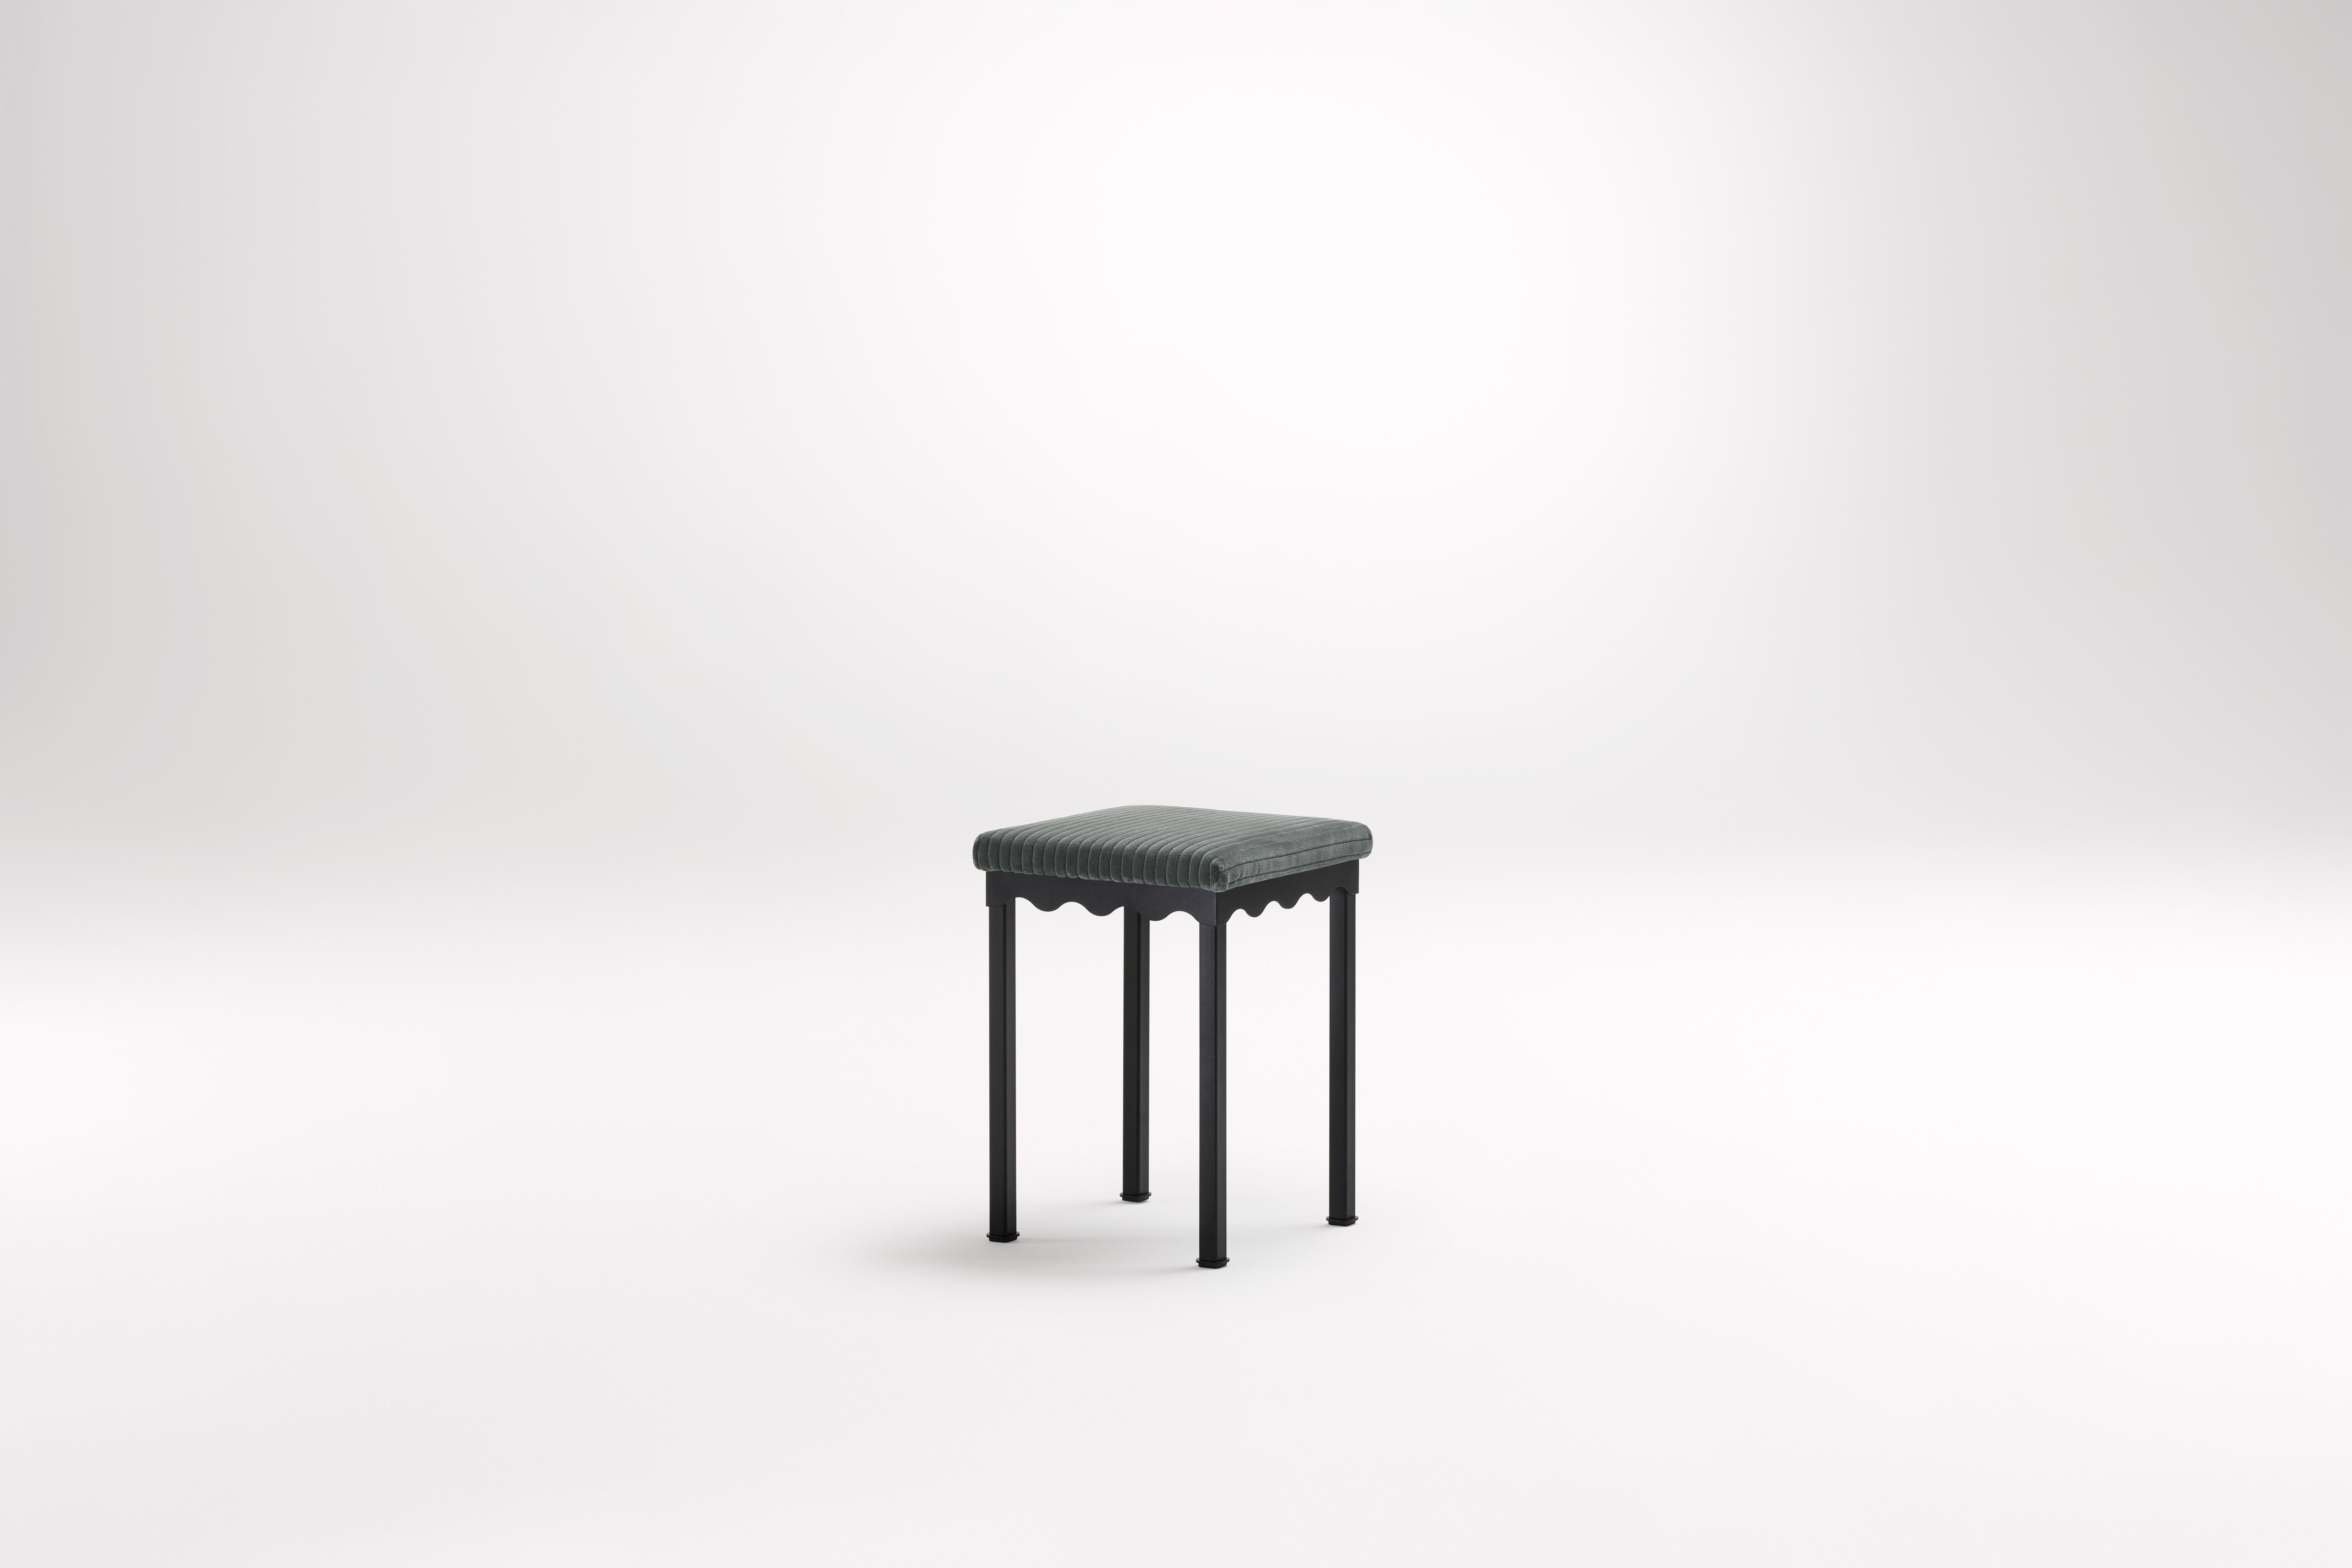 Marmoset Bellini Low Stool by Coco Flip
Dimensions: D 34 x W 34 x H 45 cm
Materials: Timber / Stone tops, Powder-coated steel frame. 
Weight: 5 kg
Frame Finishes: Textura Black.

Coco Flip is a Melbourne based furniture and lighting design studio,